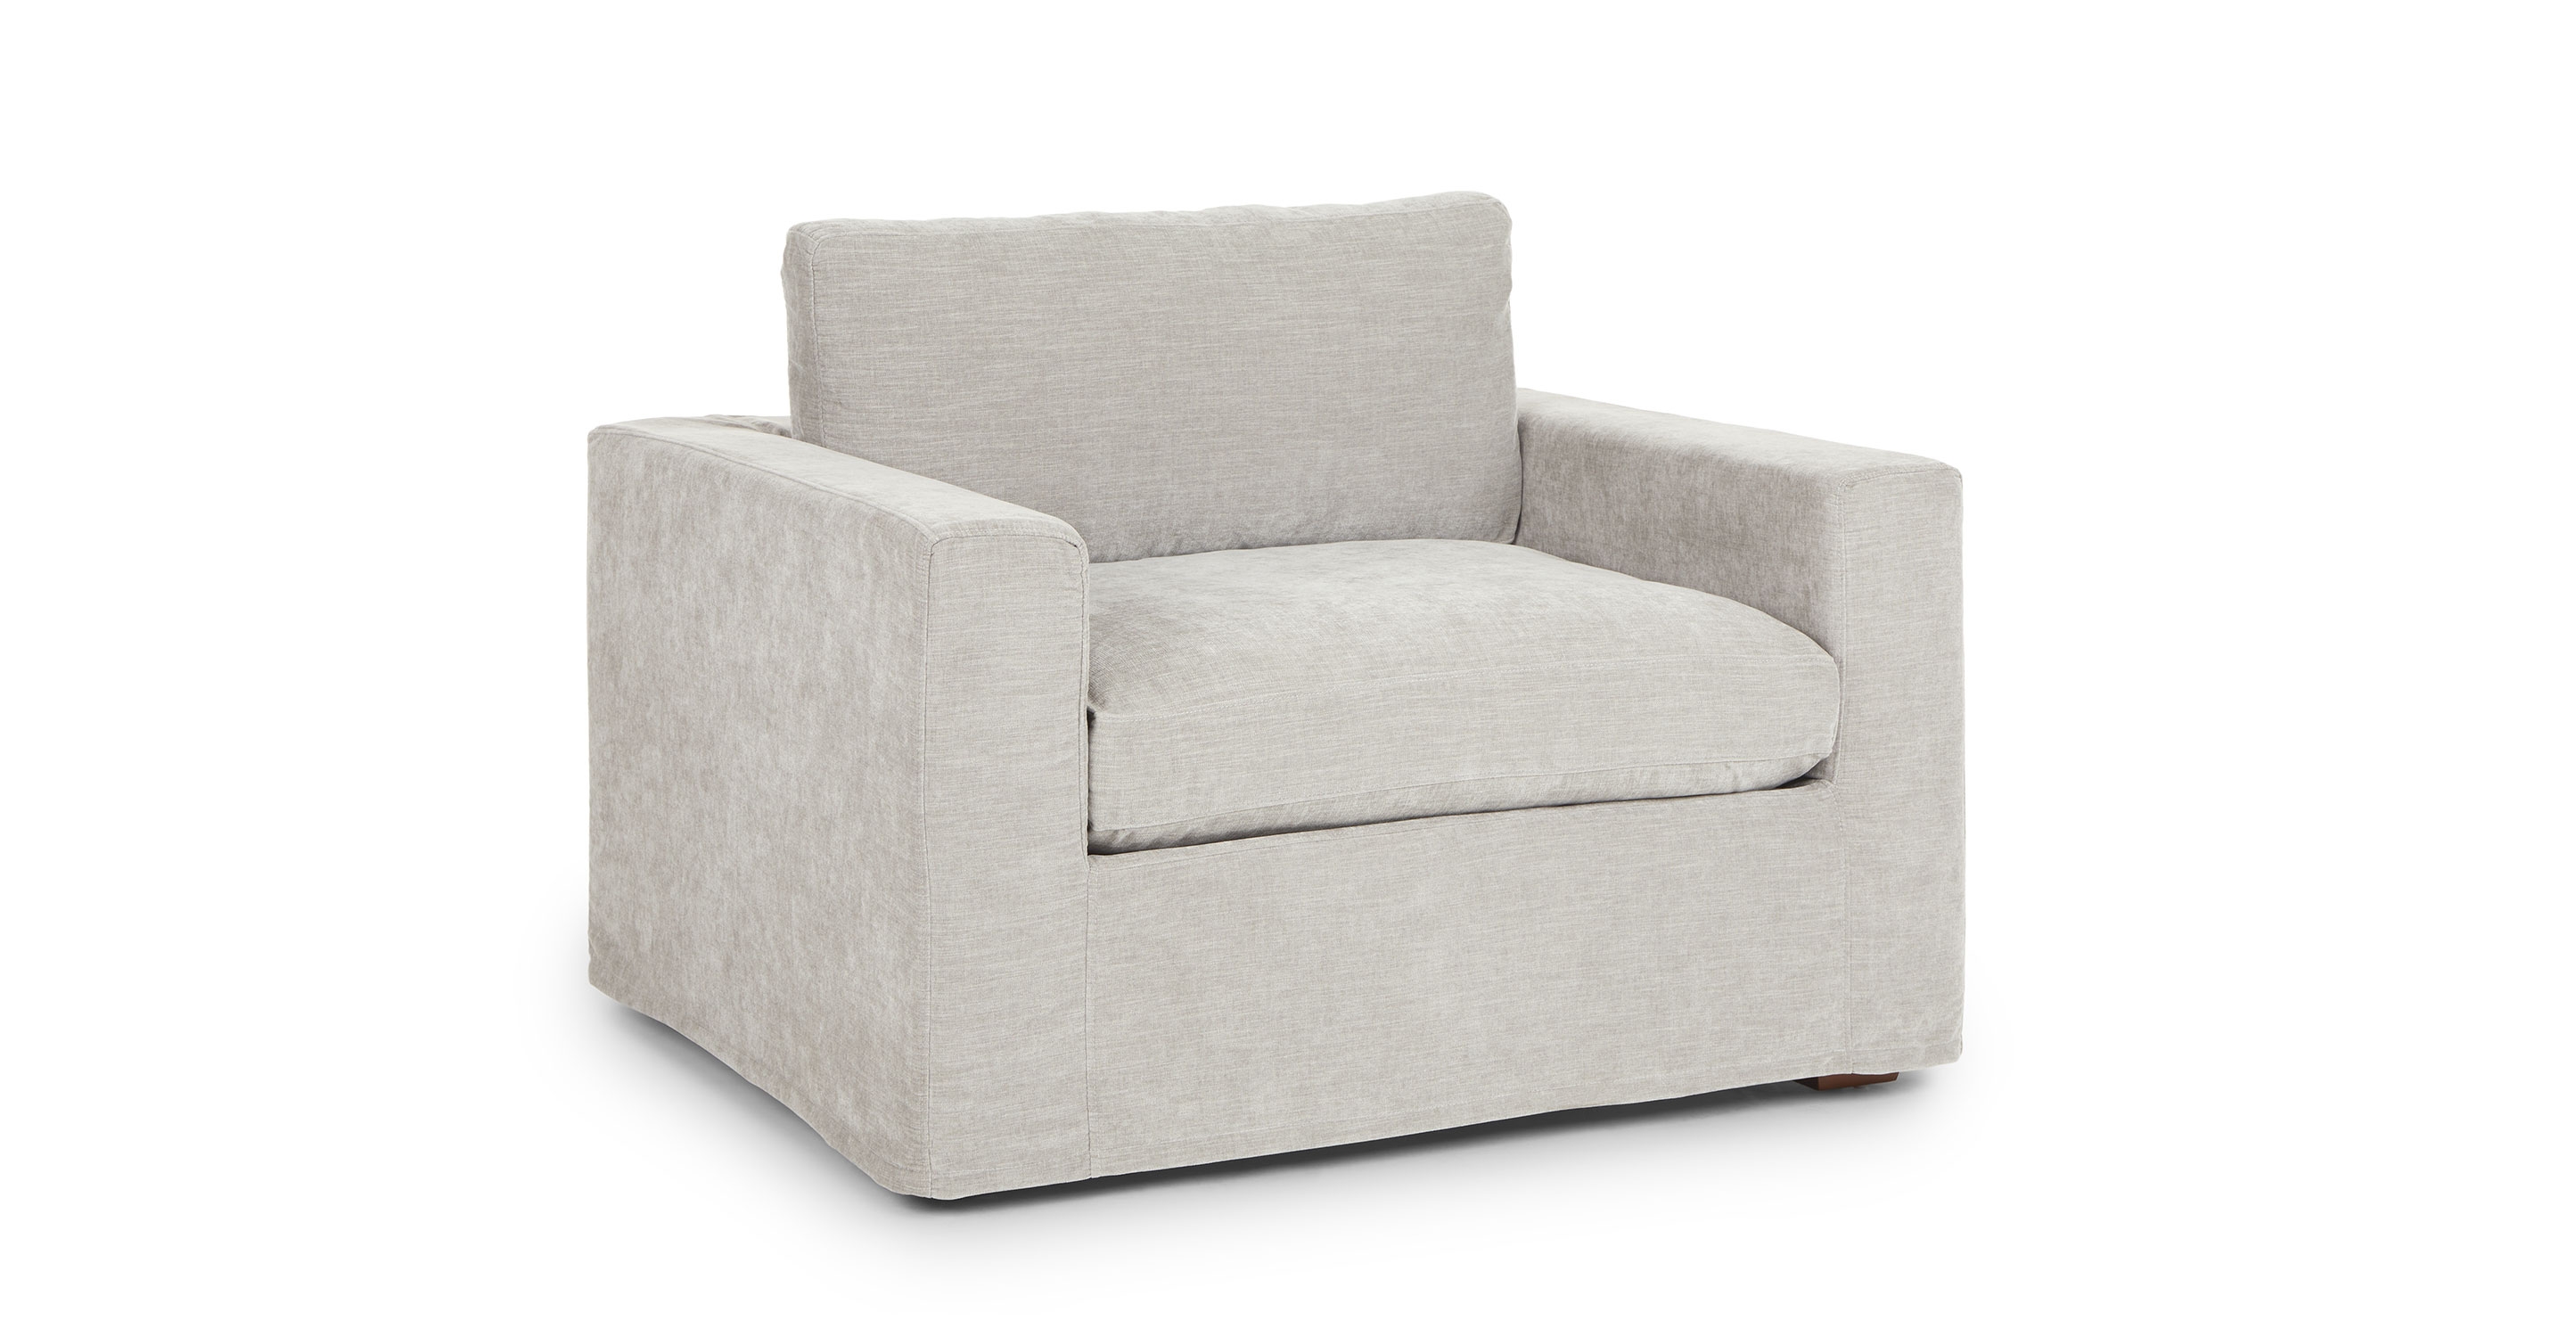 Alzey Whistle Gray Slipcover Lounge Chair - Image 1